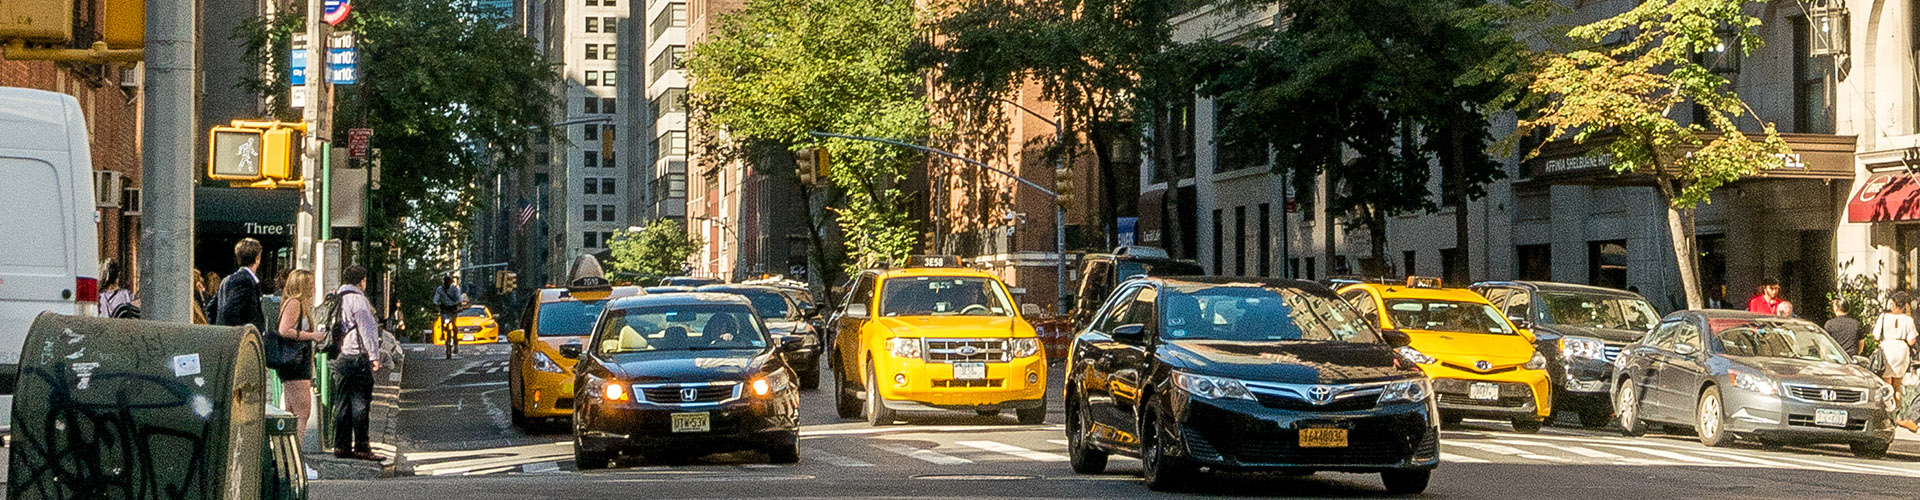 The NYC Parking Survival Guide - 4 Tips to Find the Perfect Spot